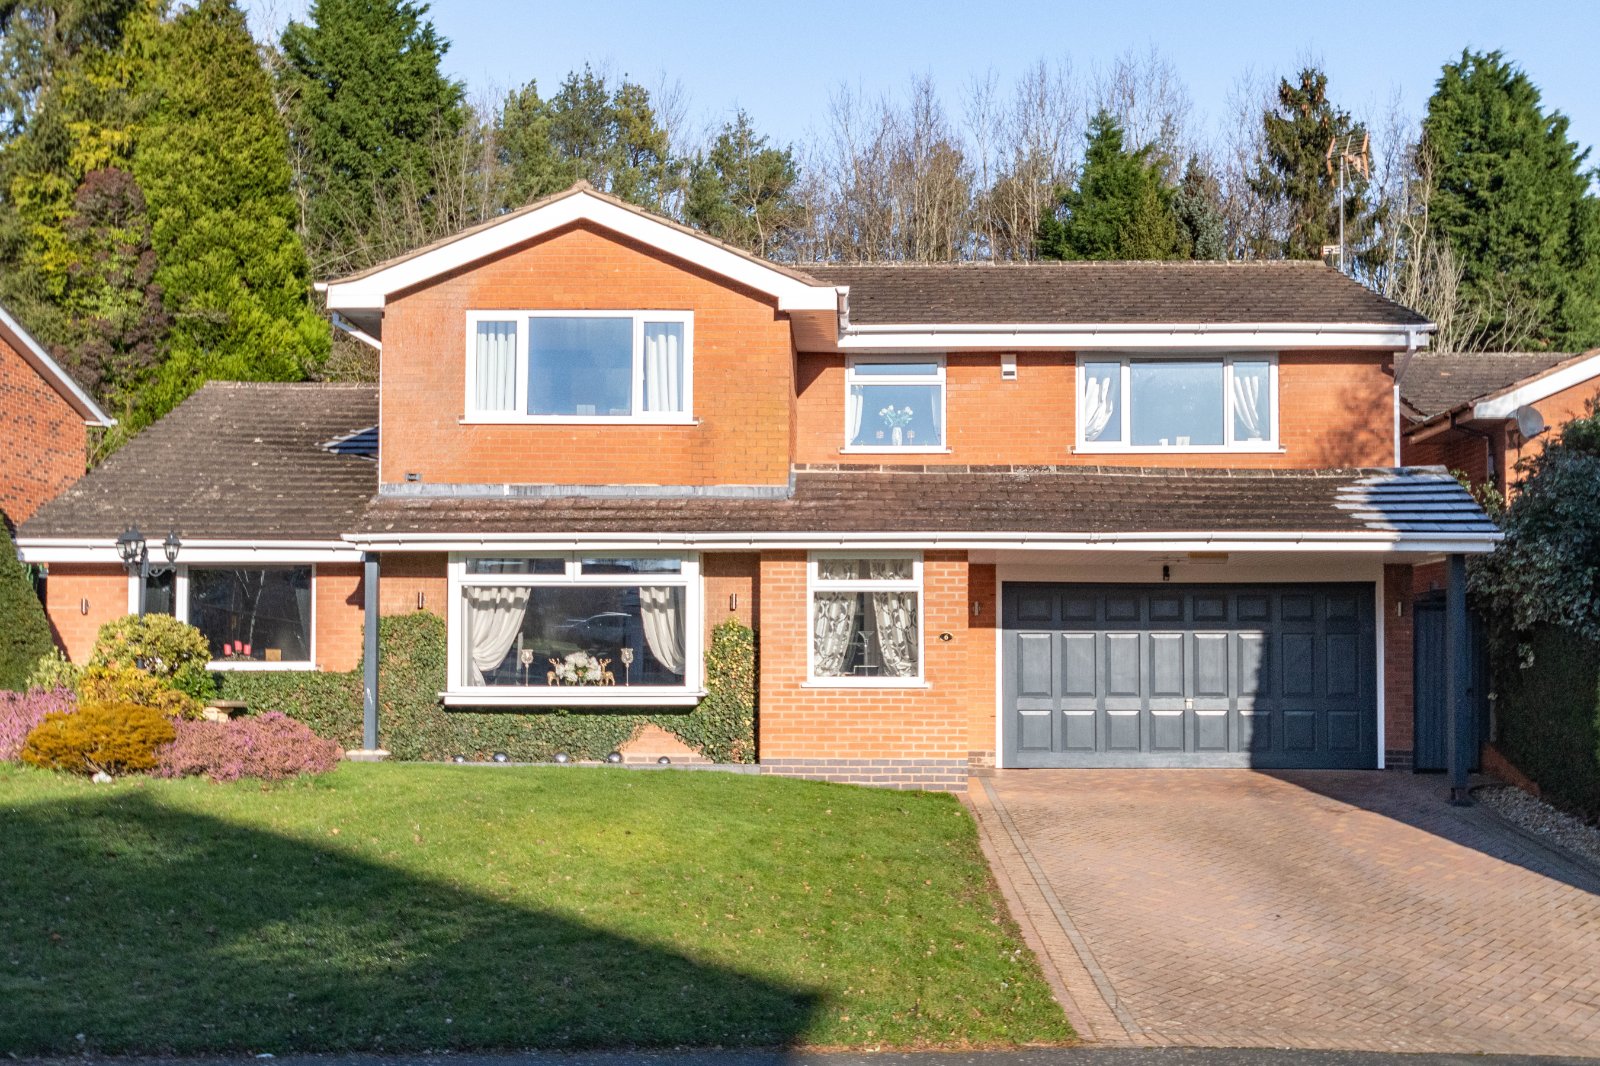 4 bed house for sale in Compton Close, Redditch - Property Image 1